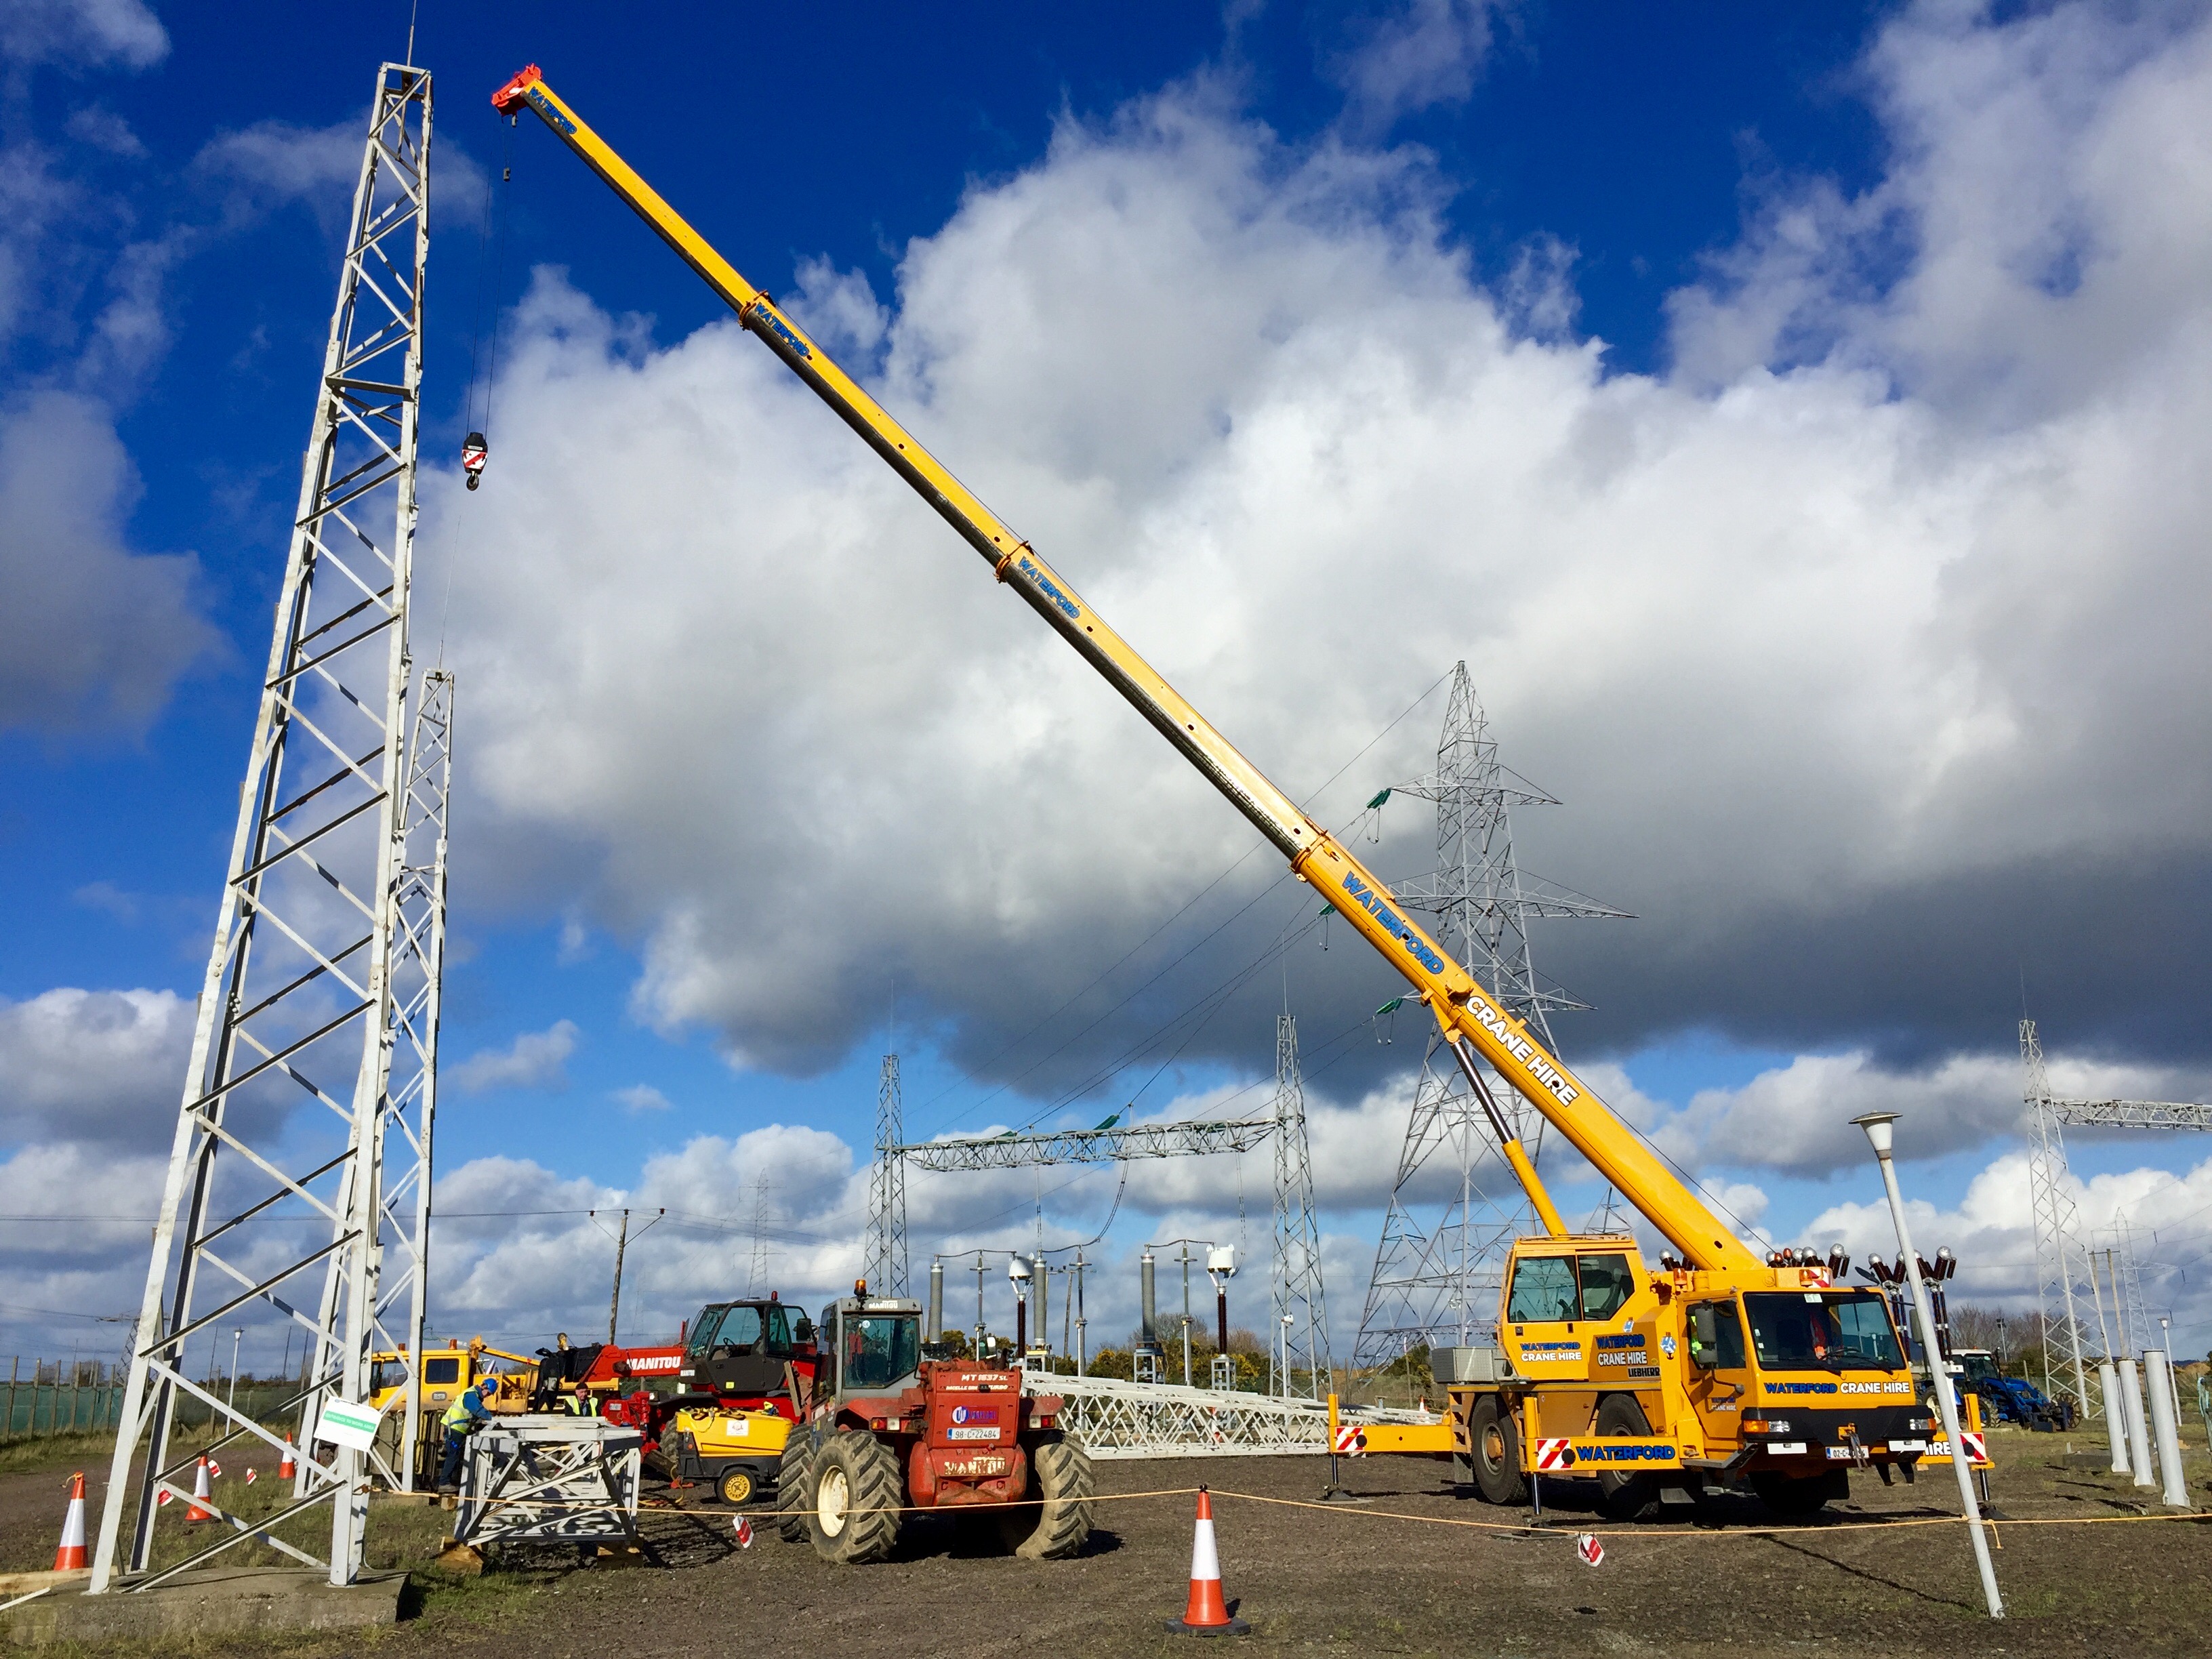 Retiring gantries under contract lift conditions at Great Island Power Station, Co. Wexford